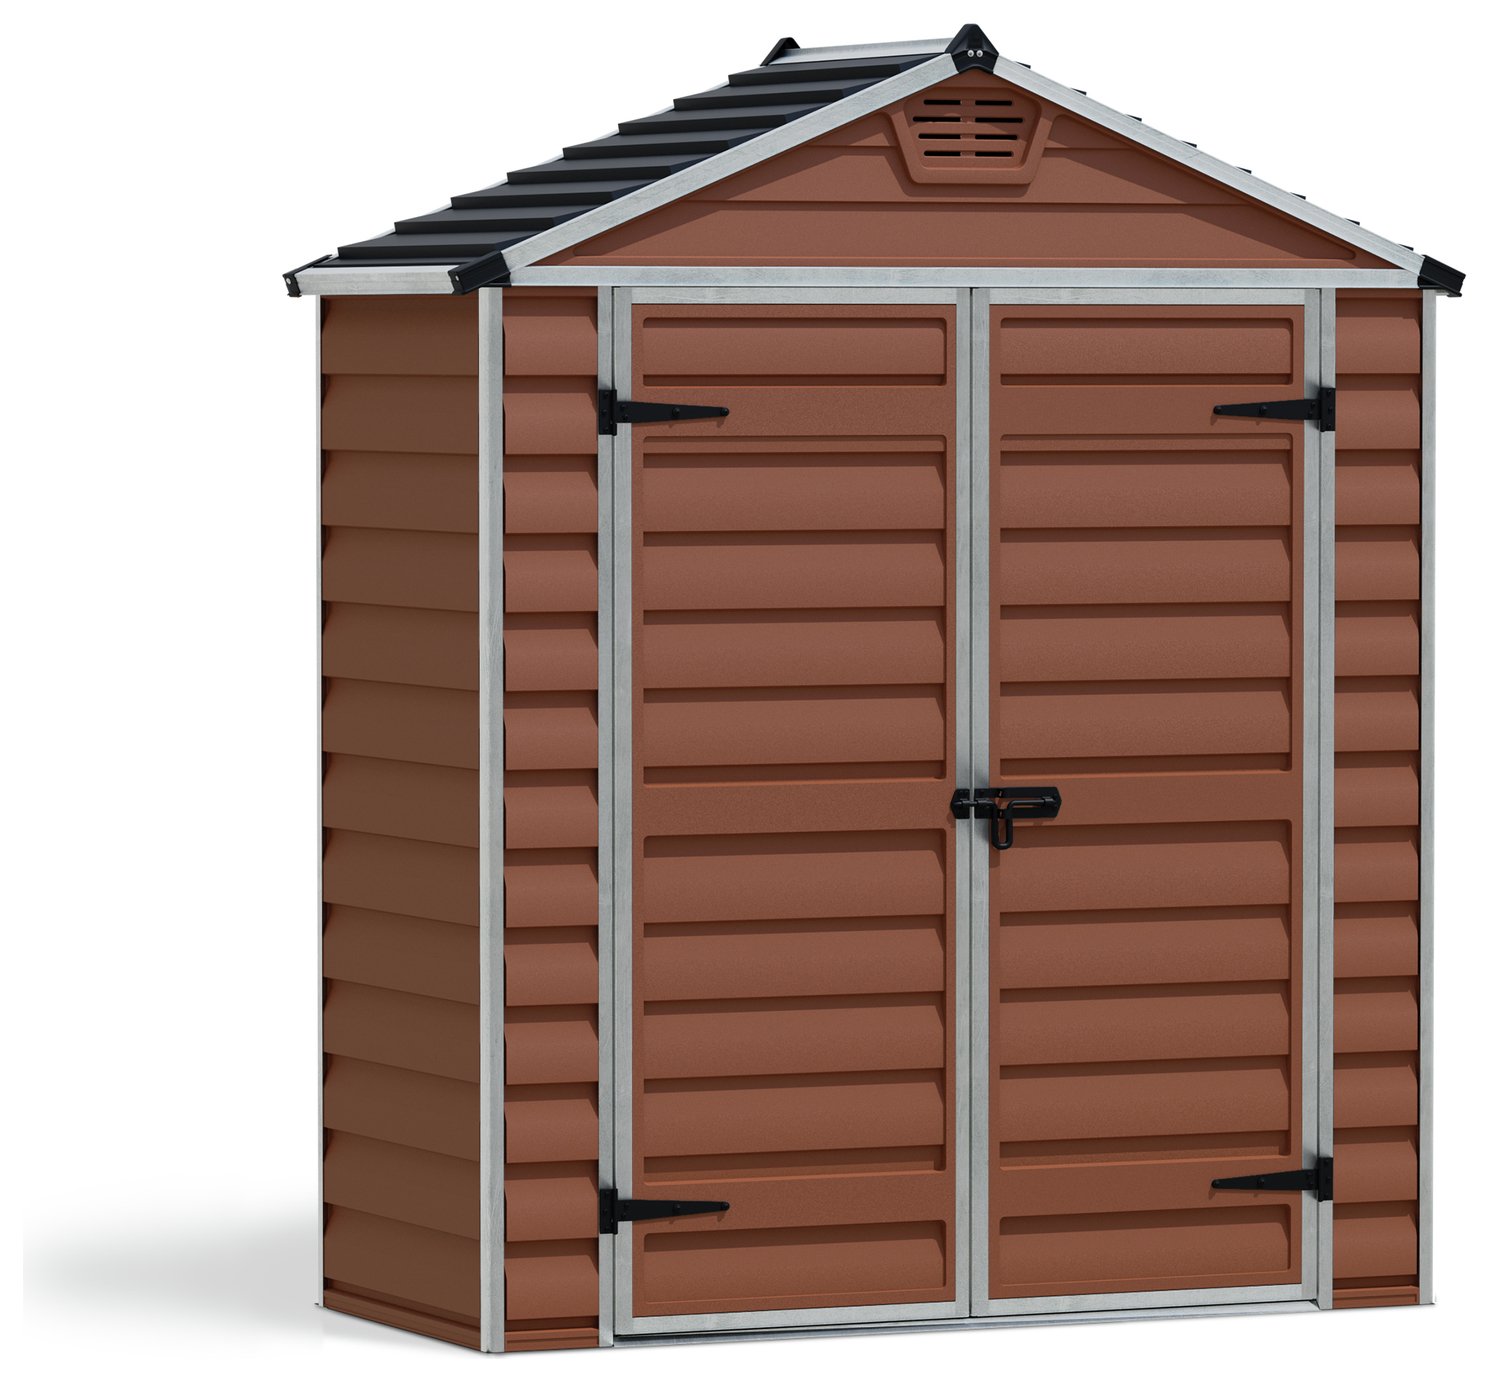 Keter Manor Plastic Shed 6x4 | £289.99 Best Price